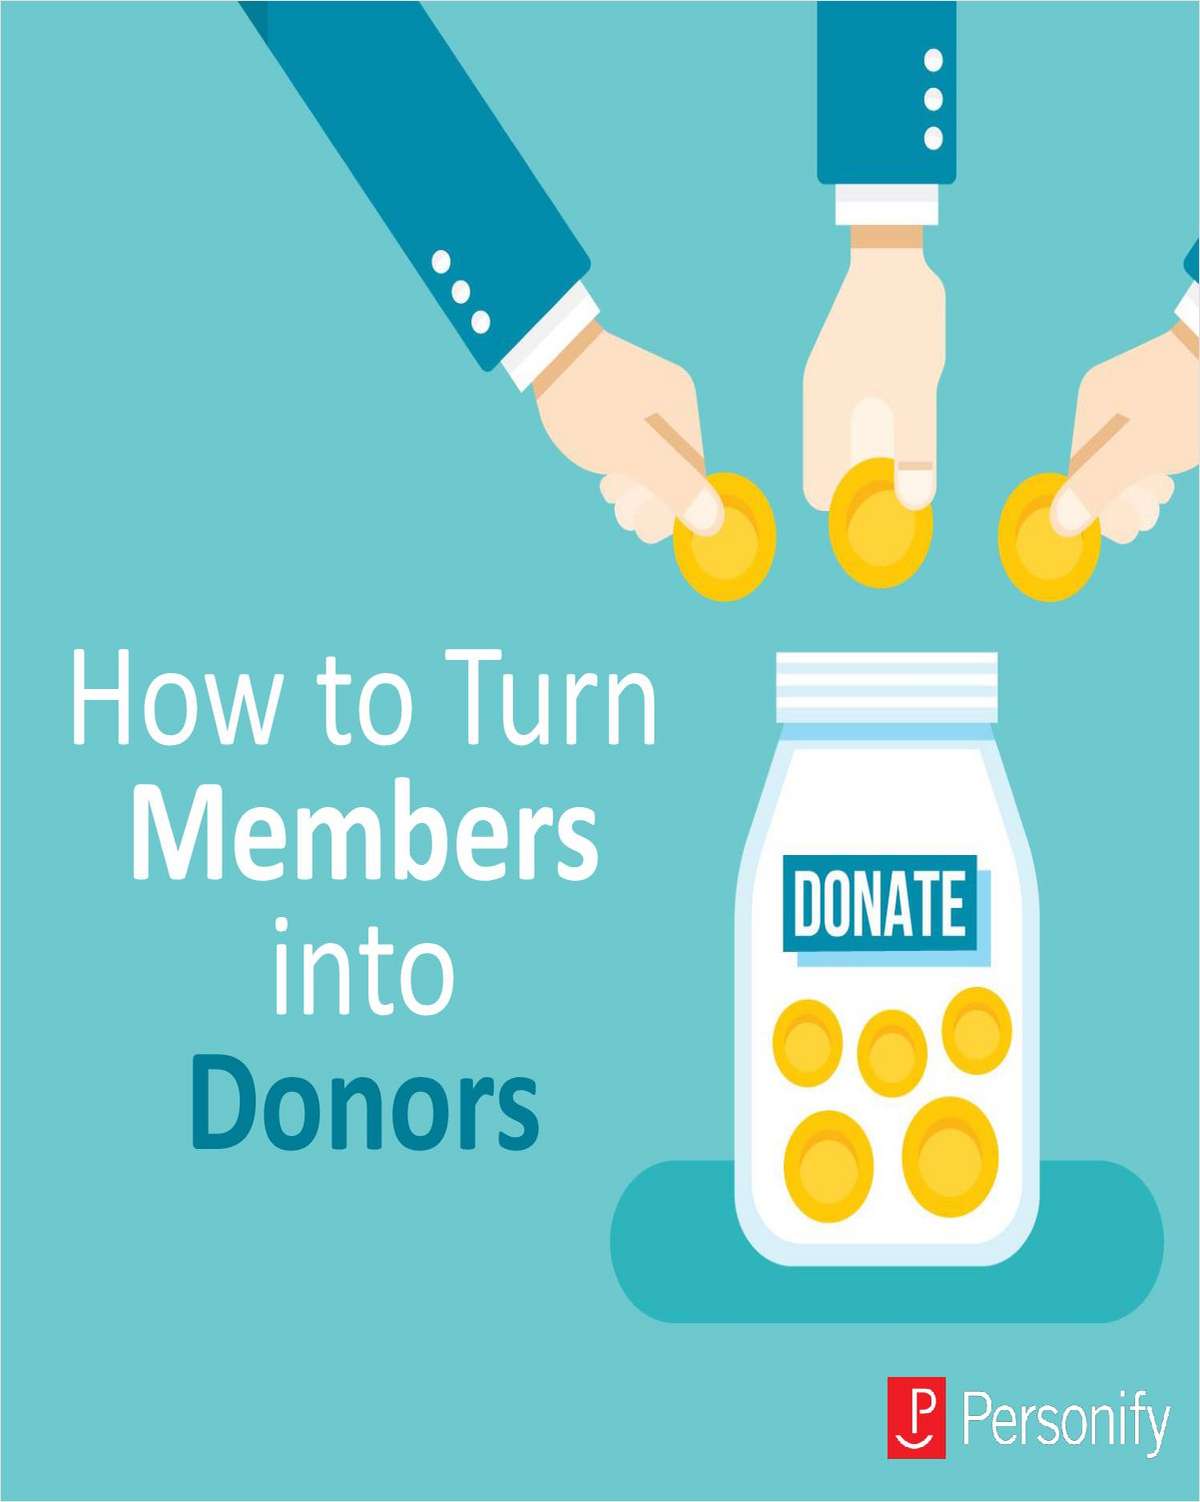 How to Turn Members into Donors